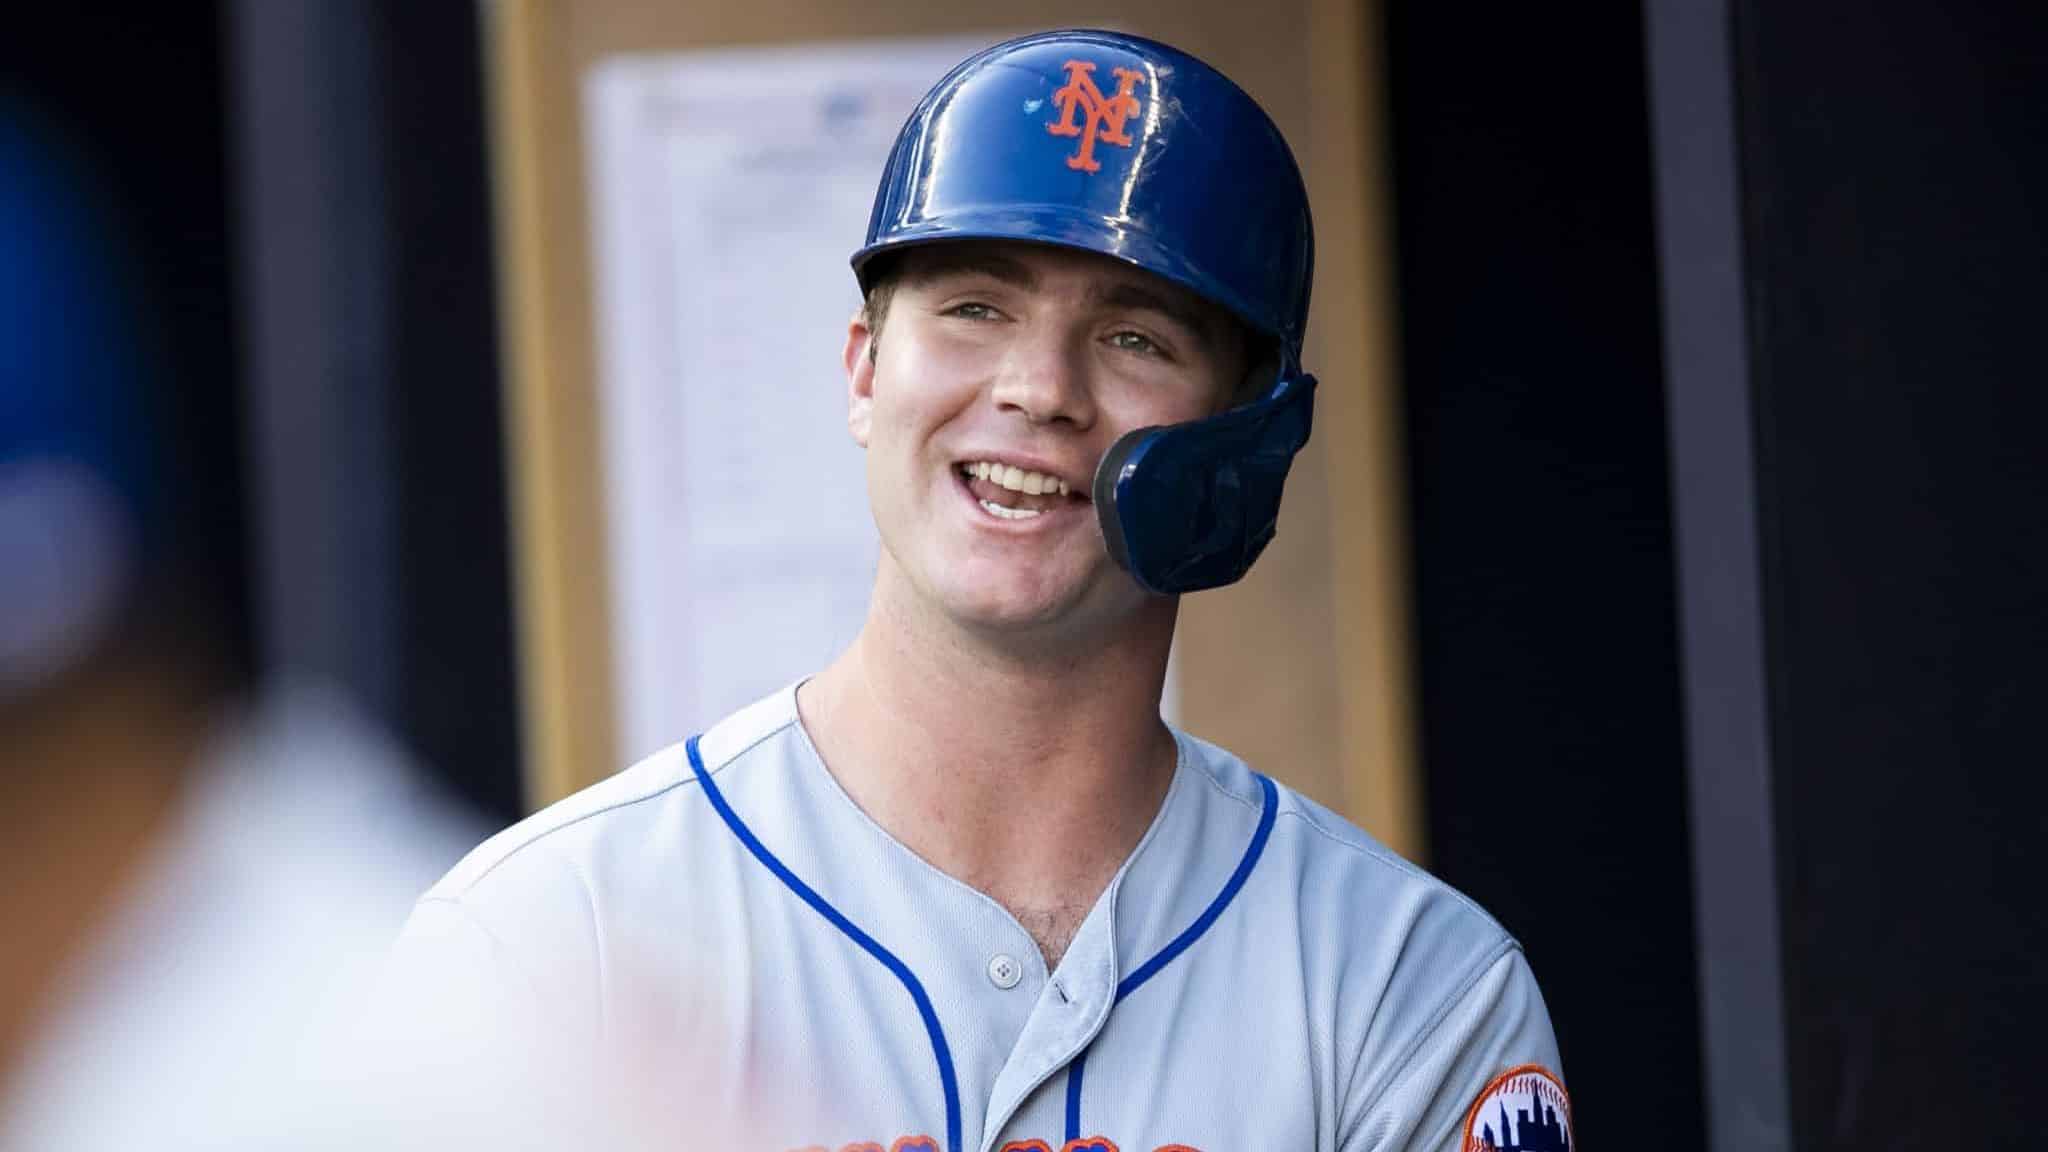 ATLANTA, GA - AUGUST 15: Pete Alonso #20 of the New York Mets looks on in the first inning during the game against the Atlanta Braves at SunTrust Park on August 15, 2019 in Atlanta, Georgia.